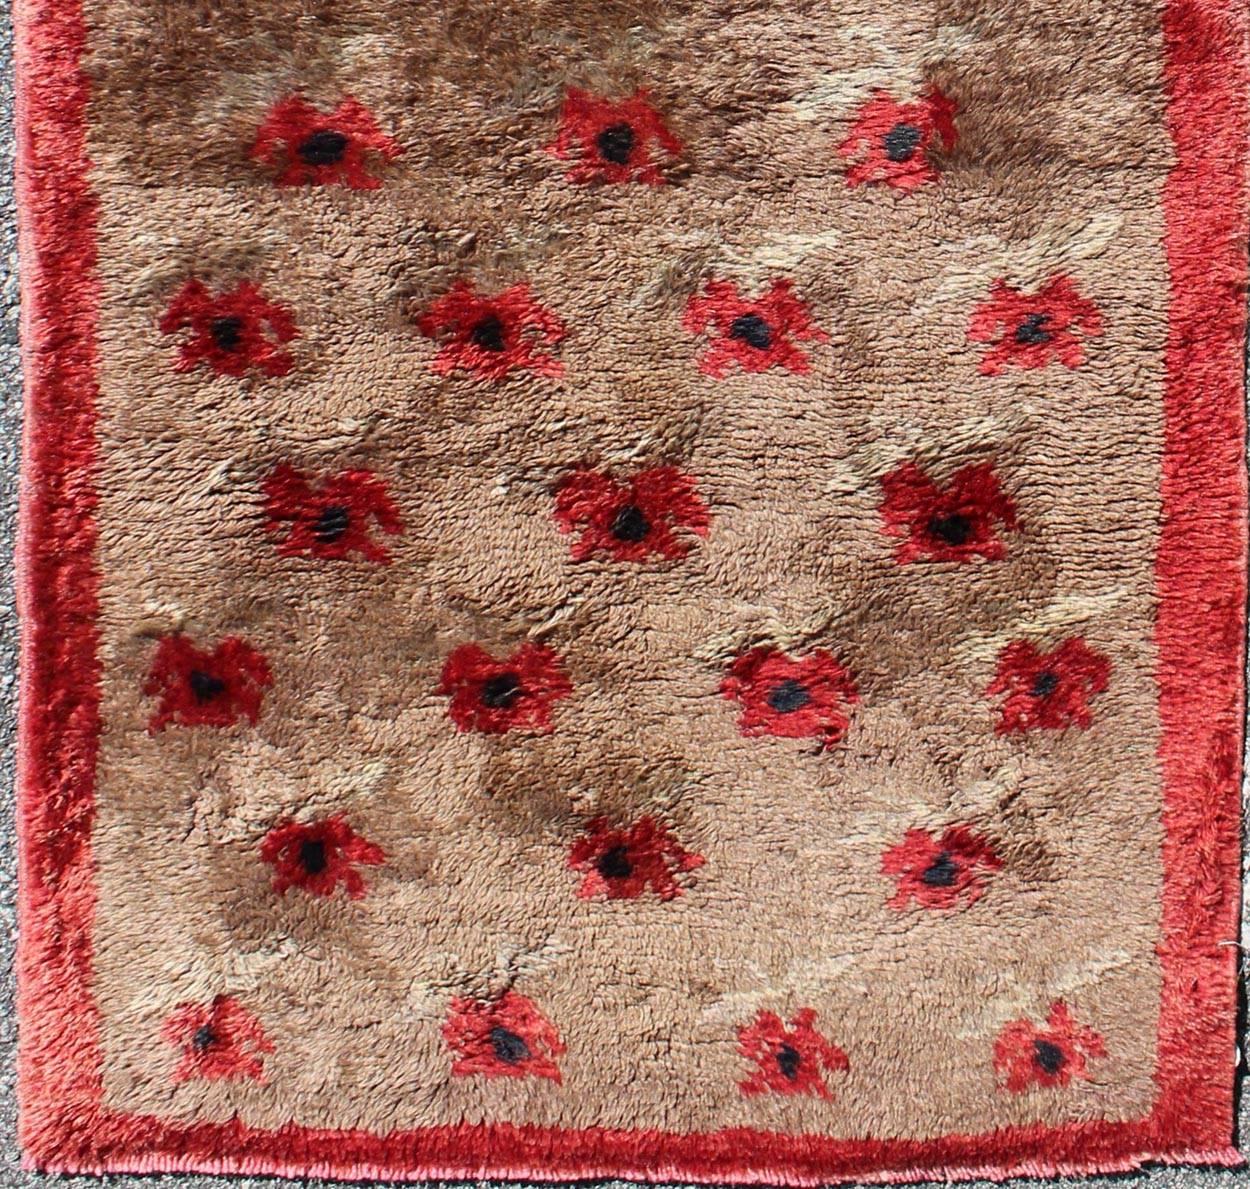    Hi Pile Mid-Century Turkish Tulu Rug with Floating Red Flowers Design, rug en-625, country of origin / type: Turkey / Tulu, circa 1950s
Hi Pile Midcentury Turkish Tulu Rug With Floating Flowers Design in Light Camel and red  
This mid-century